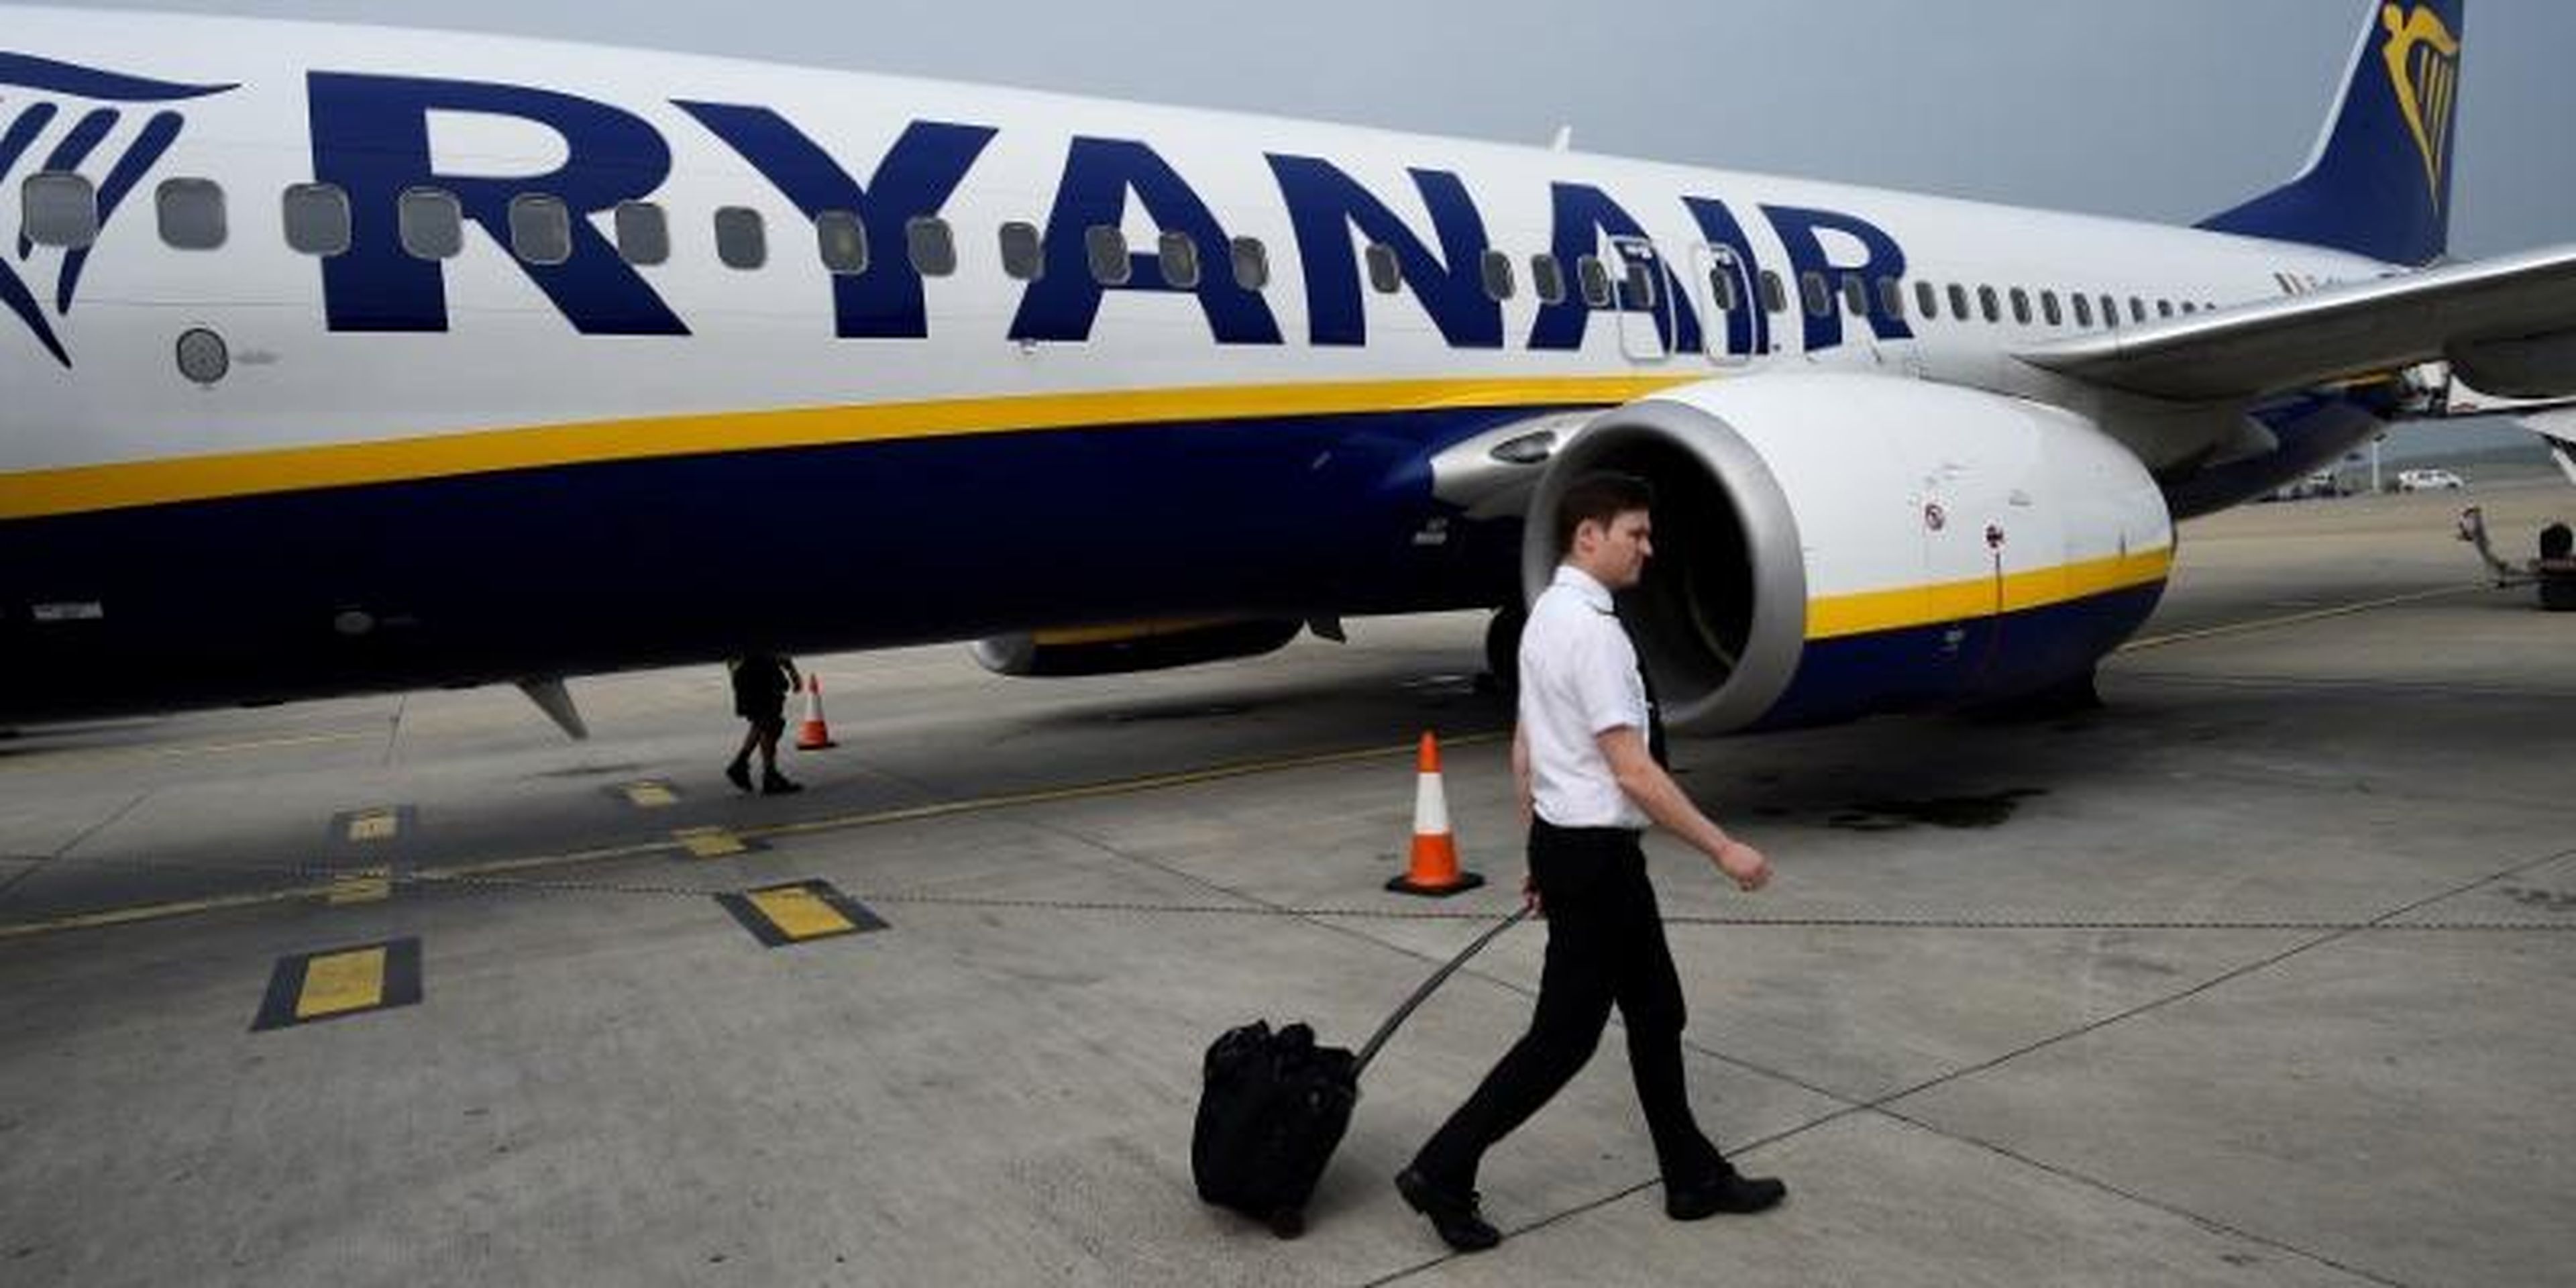 Ryanair is making its customers pay an extra fee for their carry-on baggage. Italy's competition watchdog is investigating the budget airline.